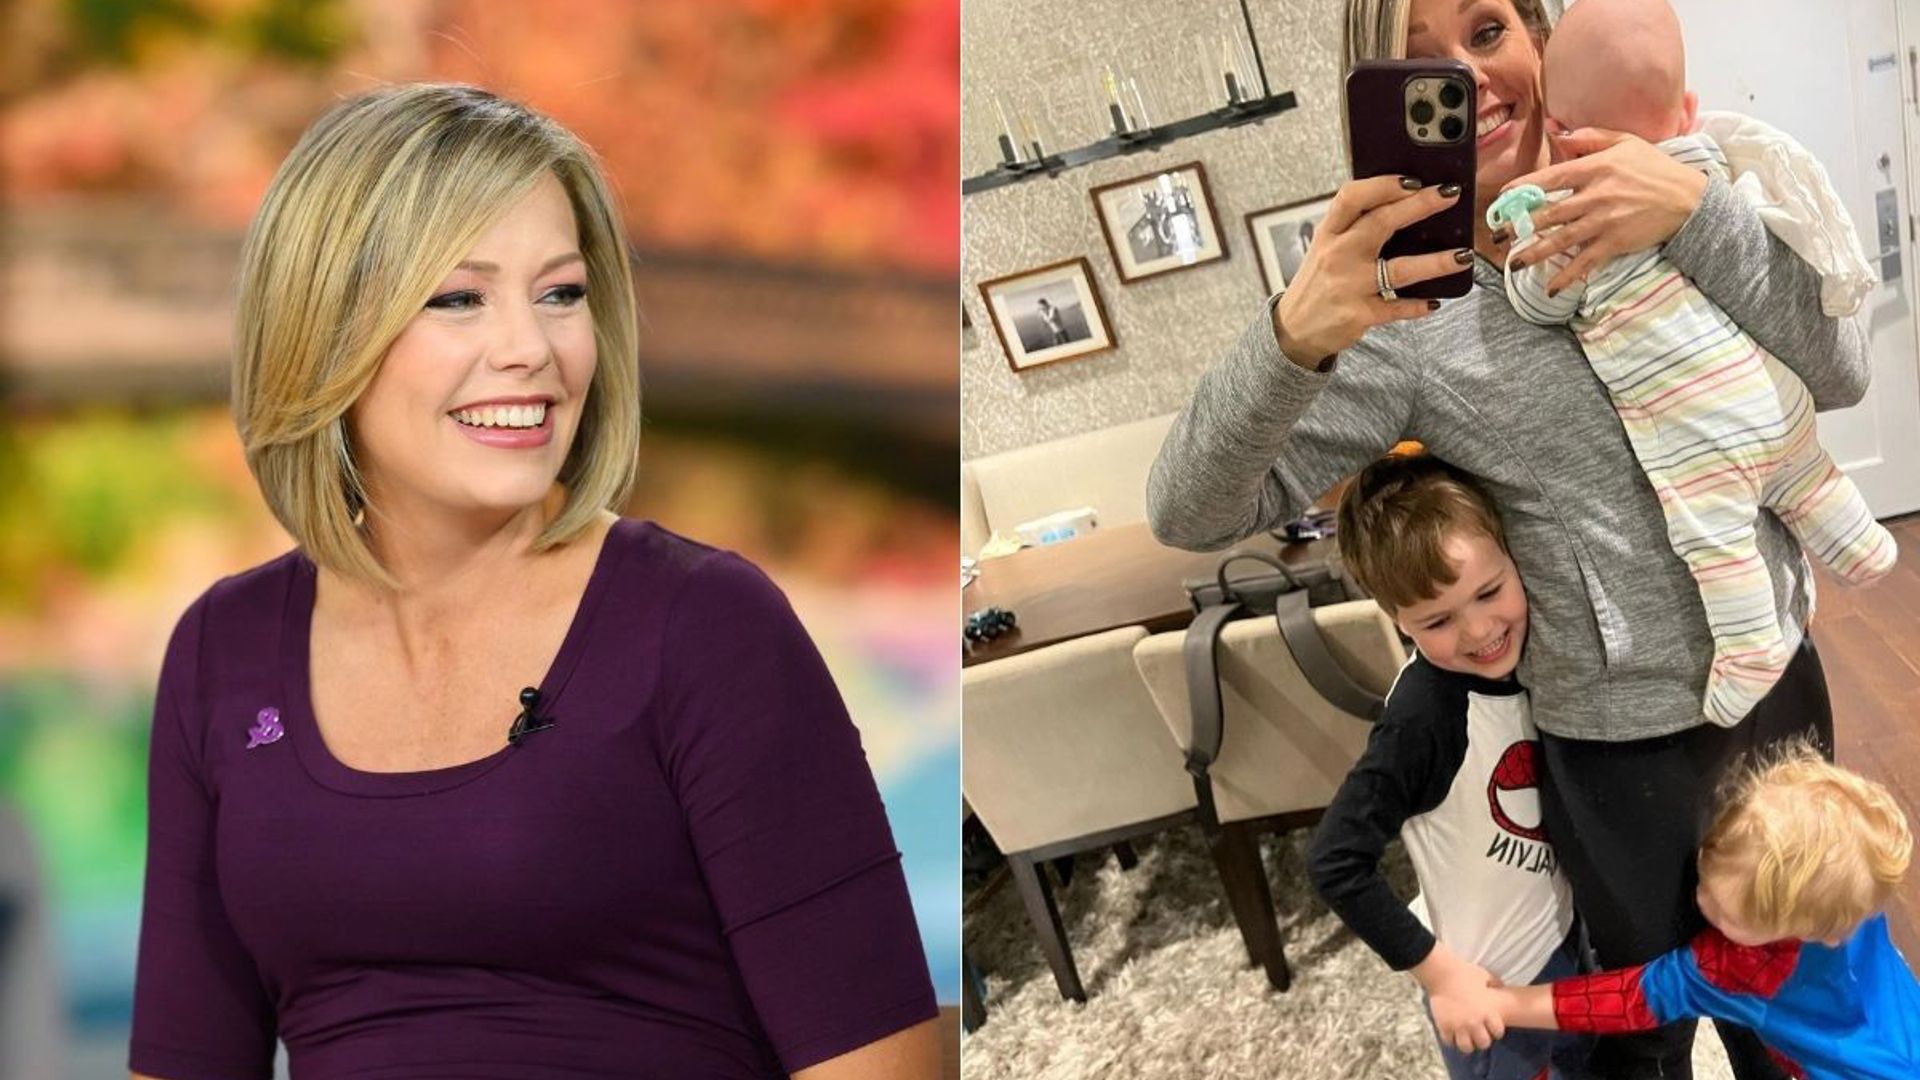 Today's Dylan Dreyer shares youngest son's latest milestone in adorable video